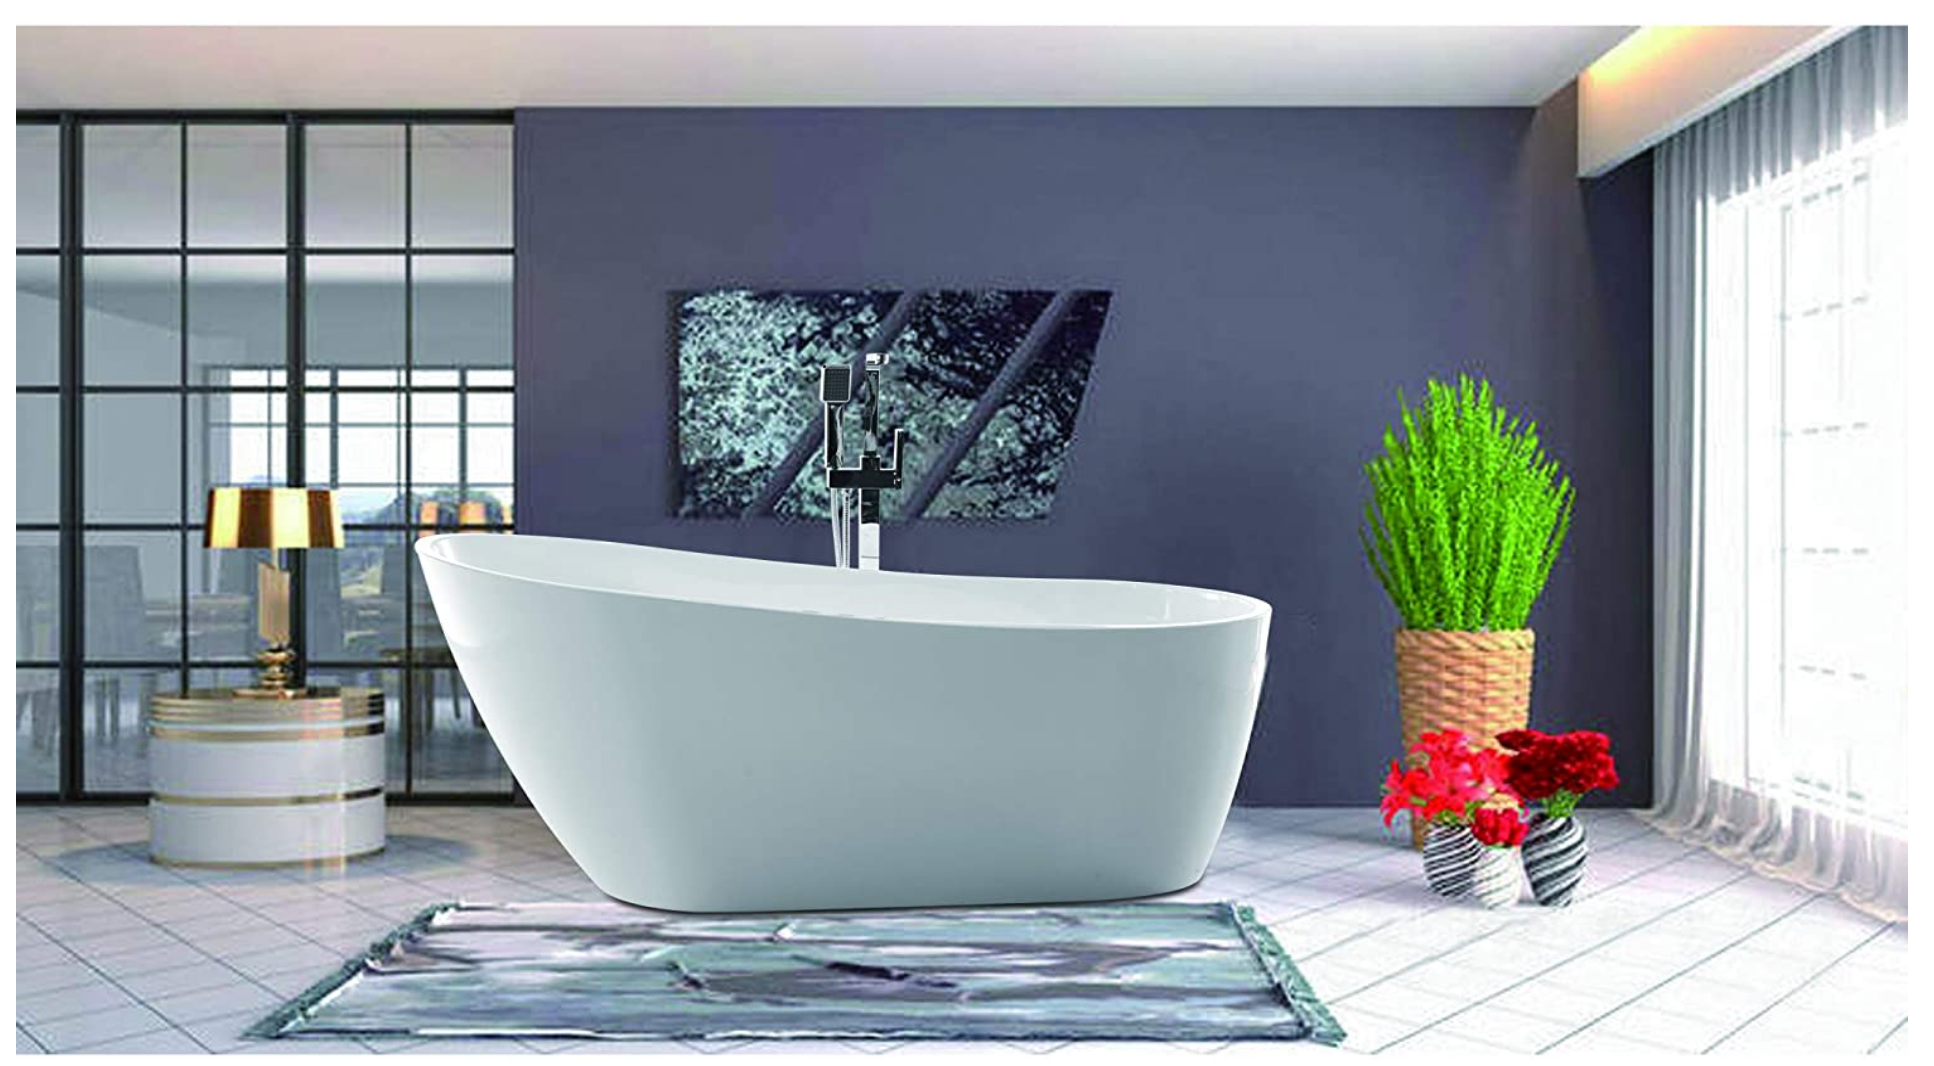 5 Best Freestanding Bathtubs Review In, Acrylic Freestanding Bathtub Reviews